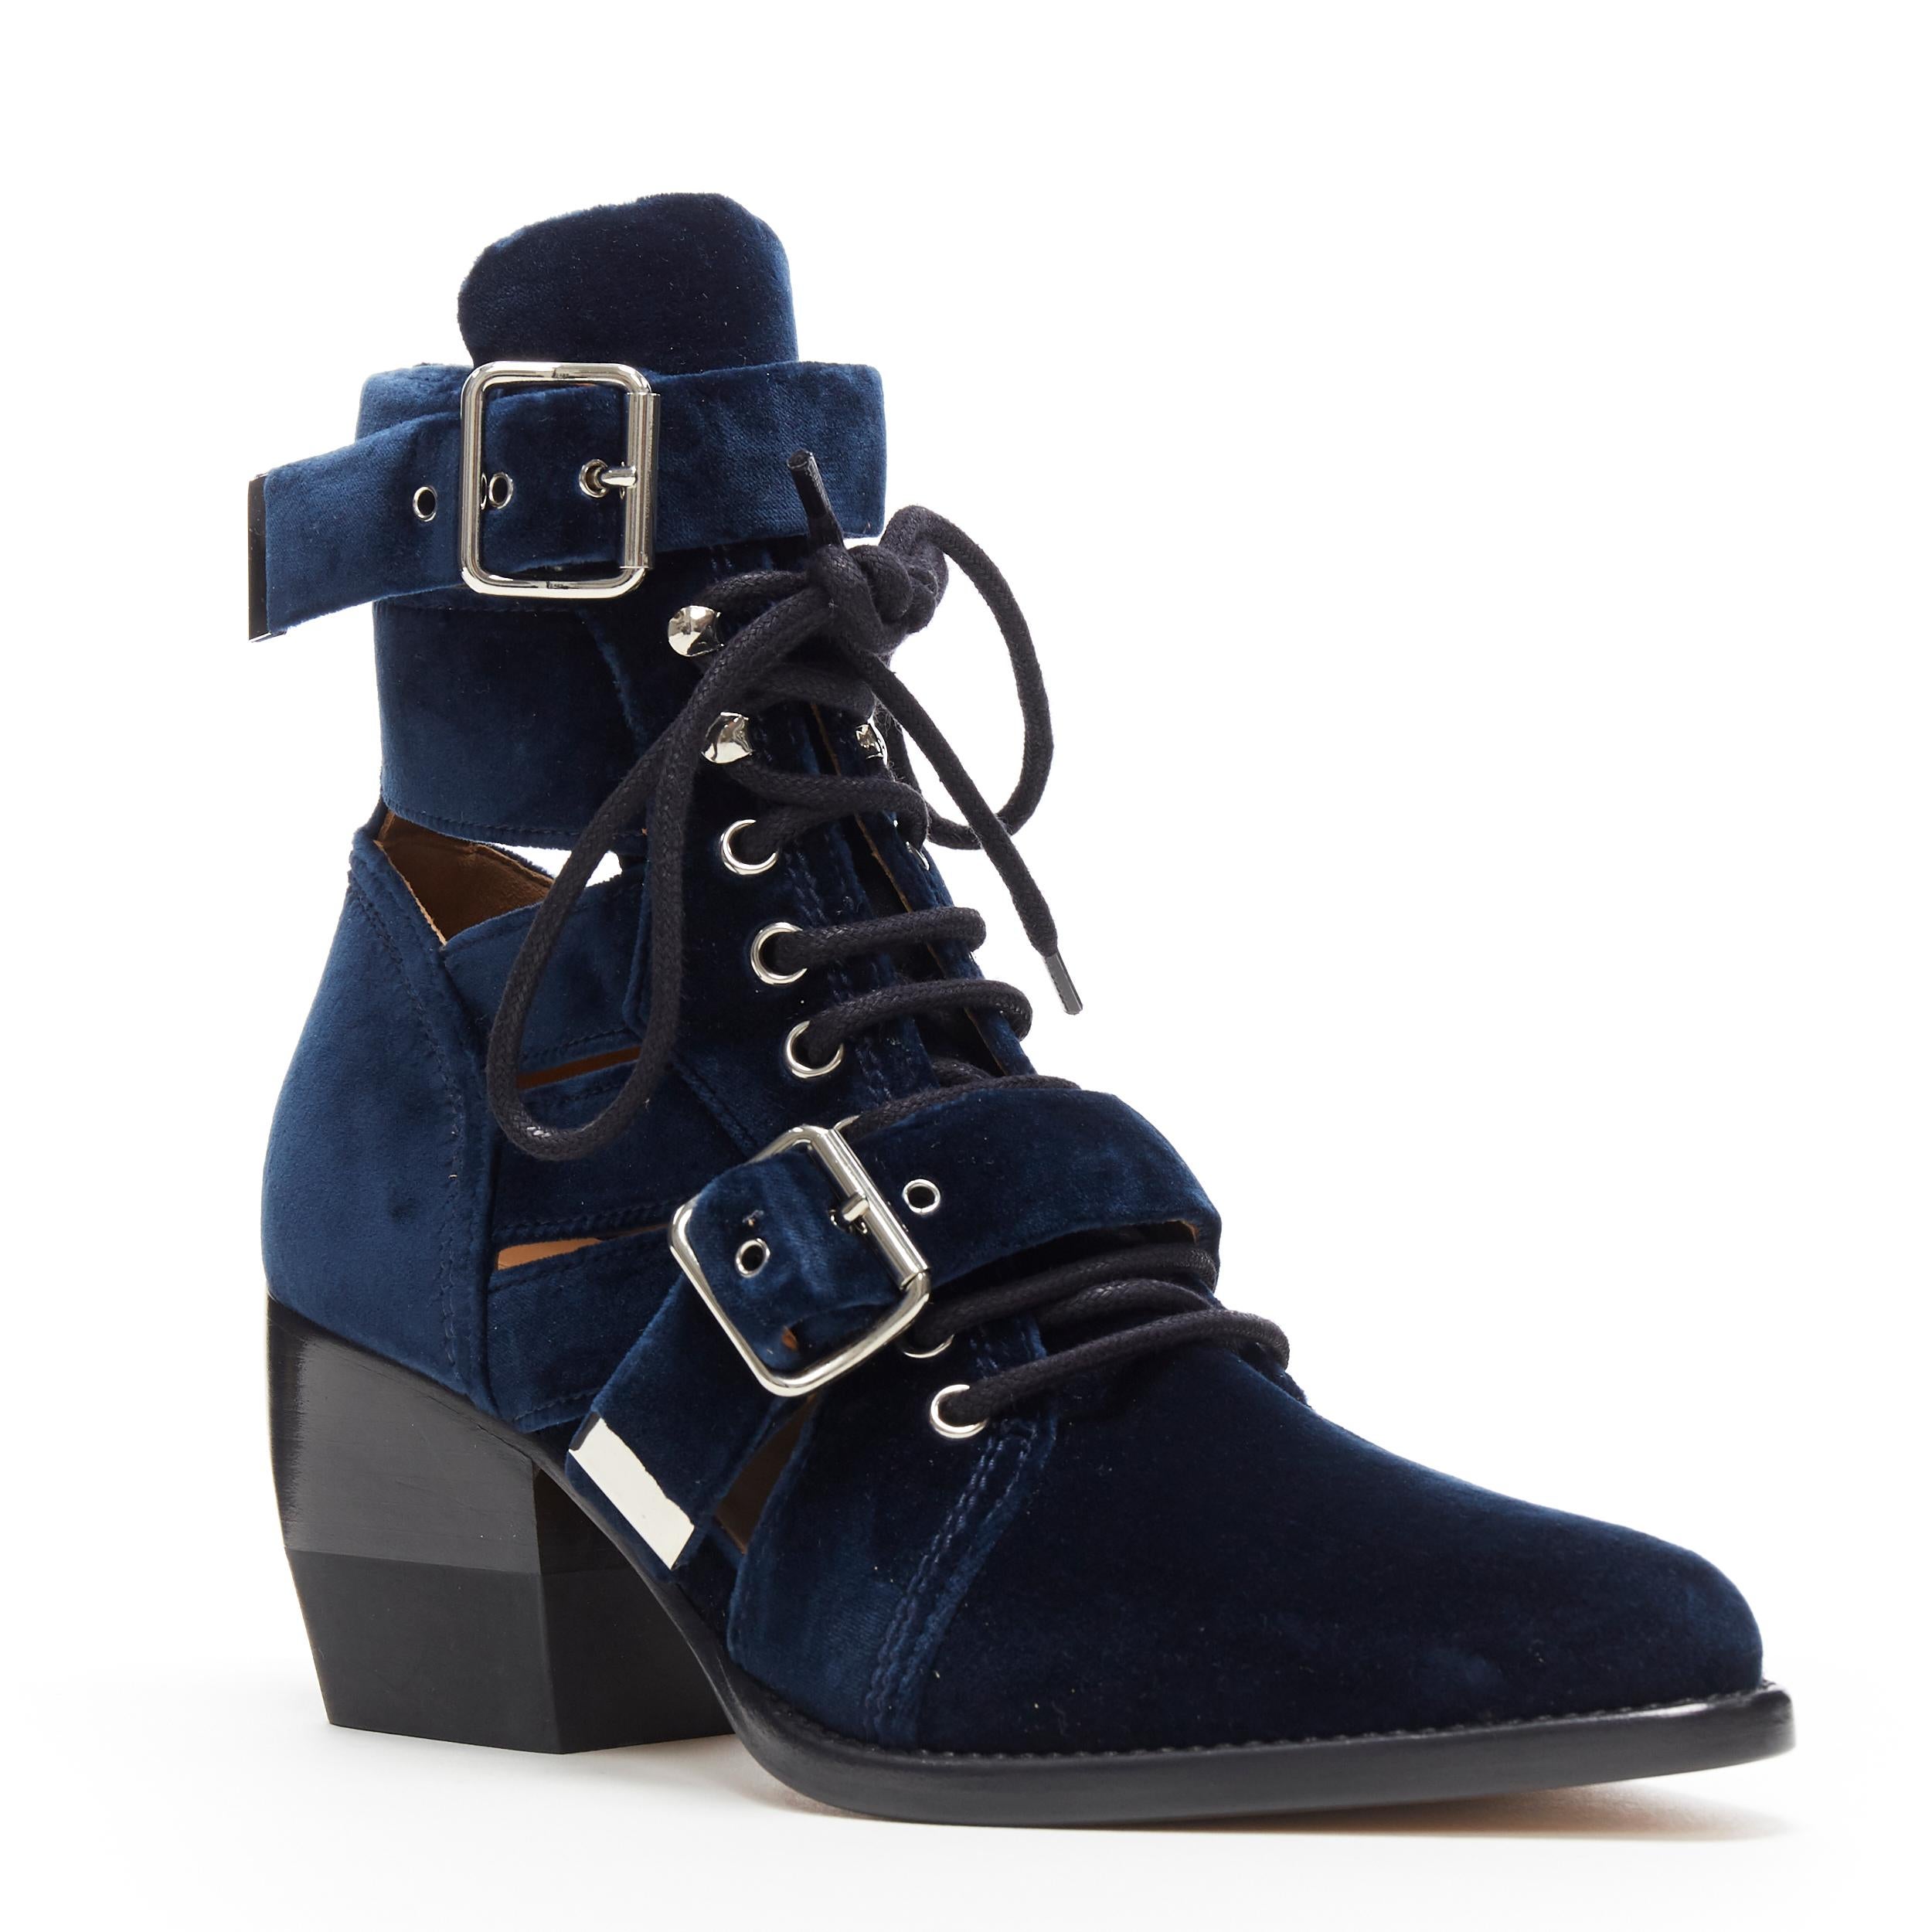 new CHLOE Rylee blue velvet buckle strap lace up cut out ankle boots EU37
Brand: Chloe
Model Name / Style: Rylee boots
Material: Velvet
Color: Blue
Pattern: Solid
Closure: Lace up
Lining material: Leather
Extra Detail: Mid (2-2.9 in) heel height.